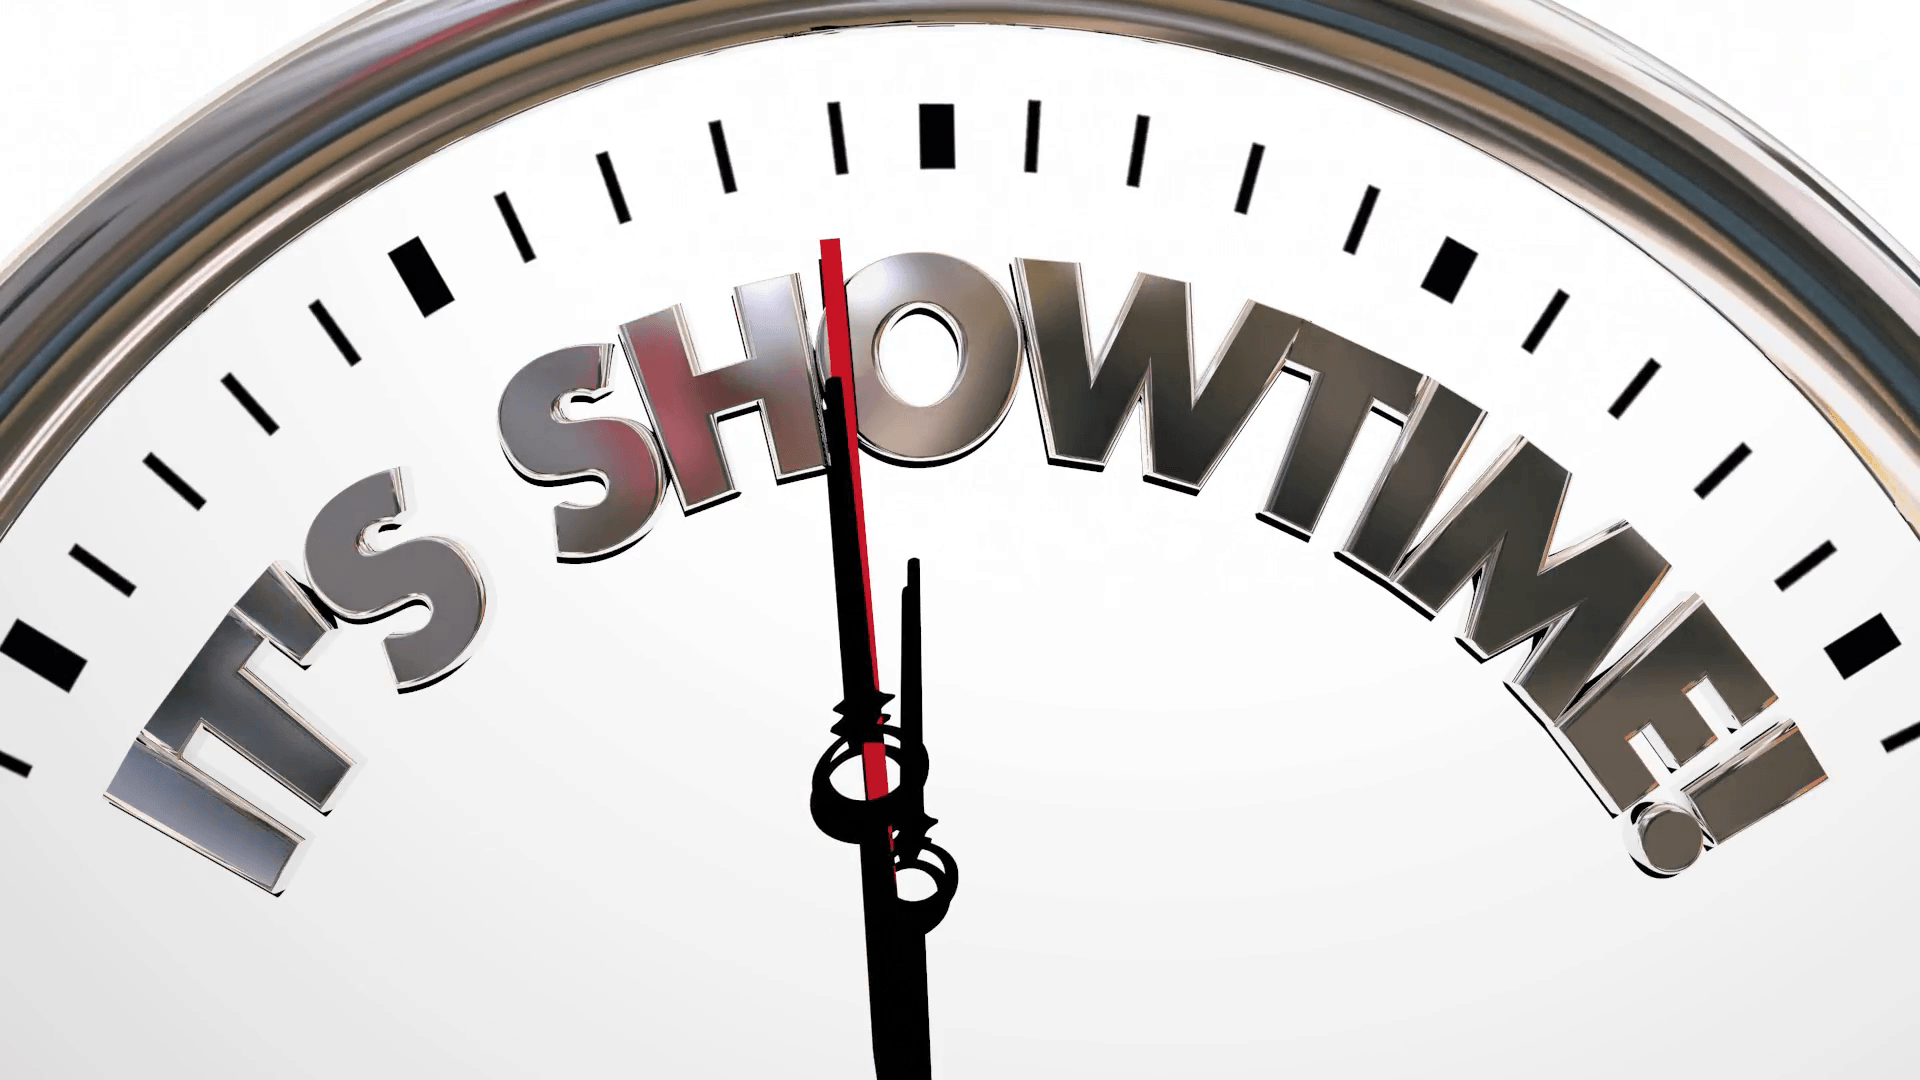 Showtime Movie Wallpaper (image in Collection)